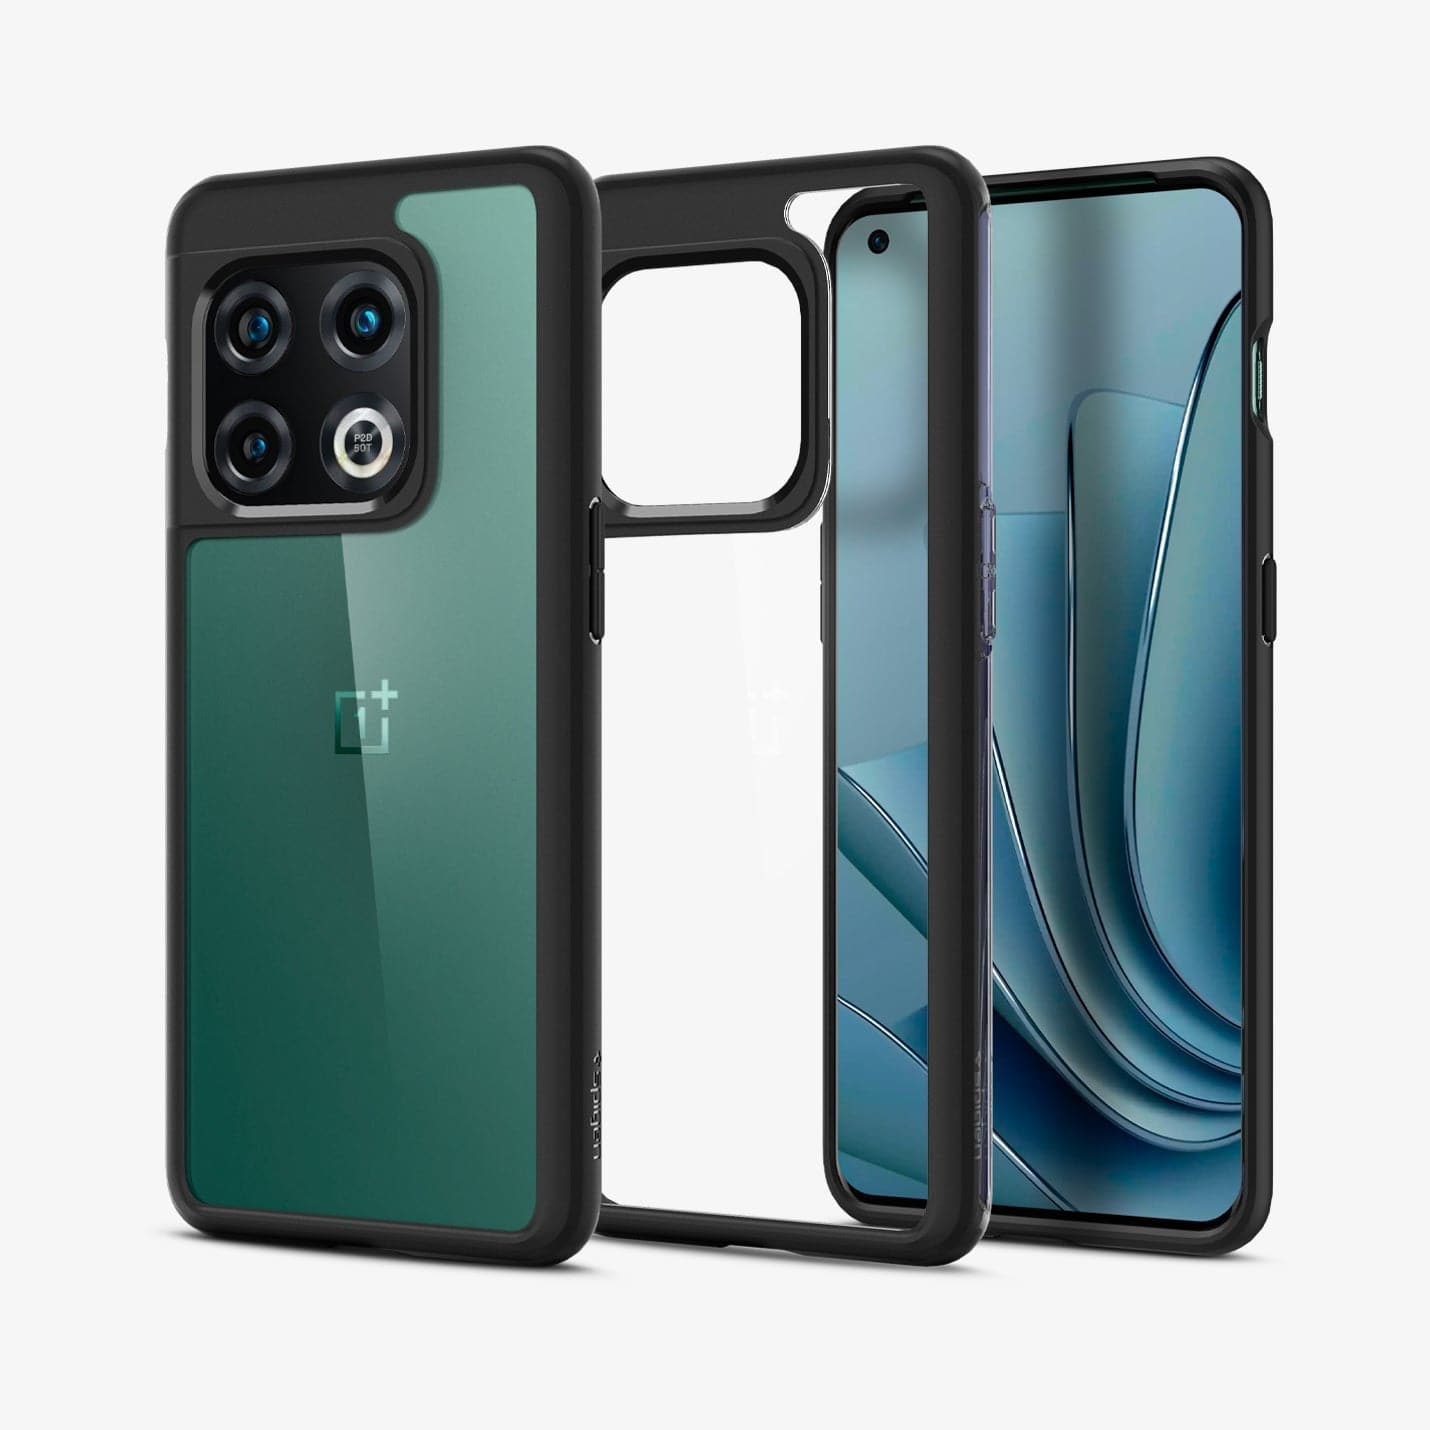 ACS04429 - OnePlus 10 Pro Ultra Hybrid Case in Black showing the back, frame of the case, front of device and partial sides paralleled with each other